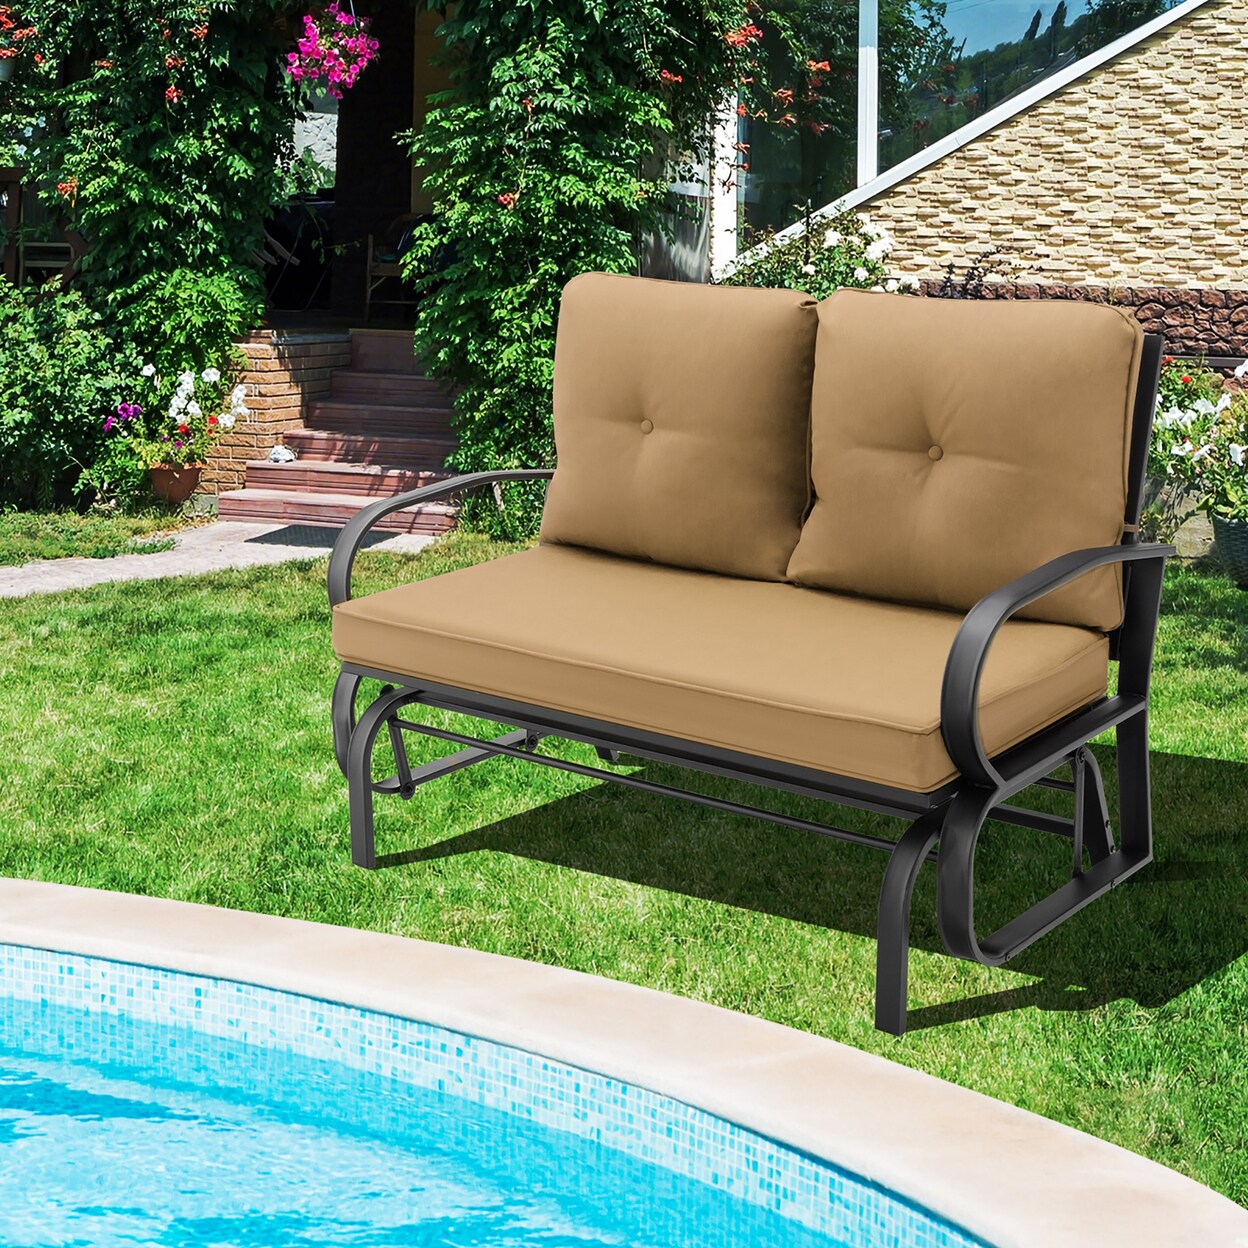 Gymax 2-Person Outdoor Patio Glider Bench Swing Seat Bench w/ Seat and Back Cushions